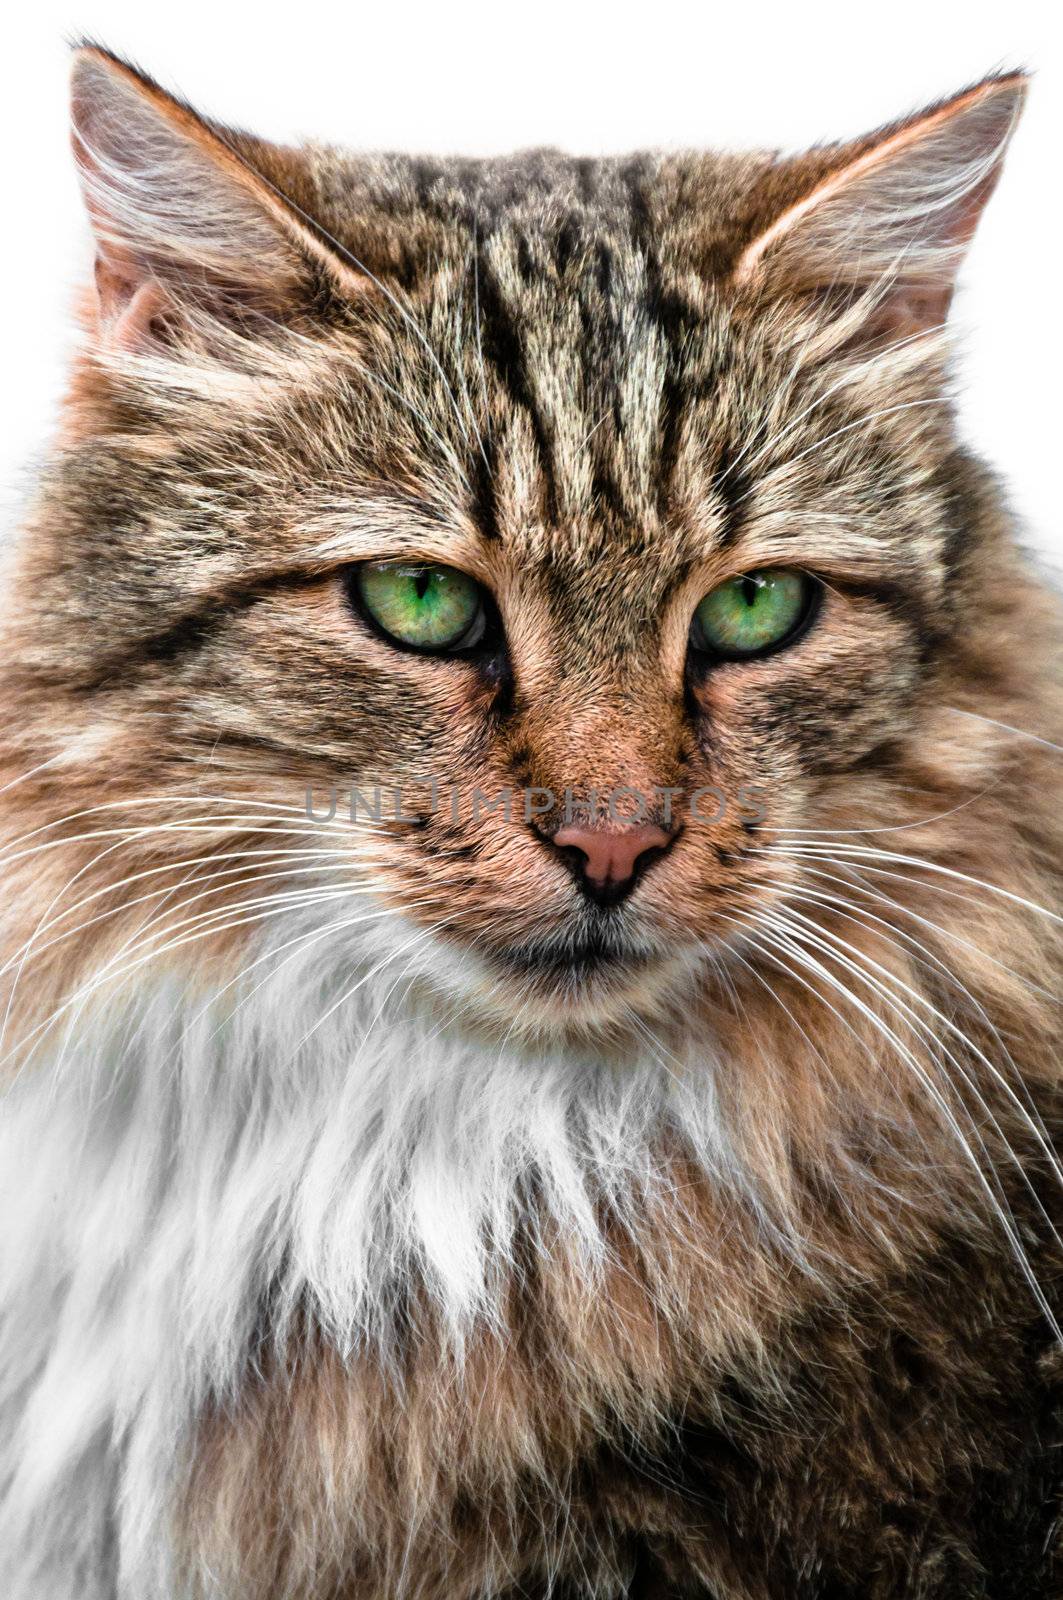 Looking cat with large and green eyes portrait front view